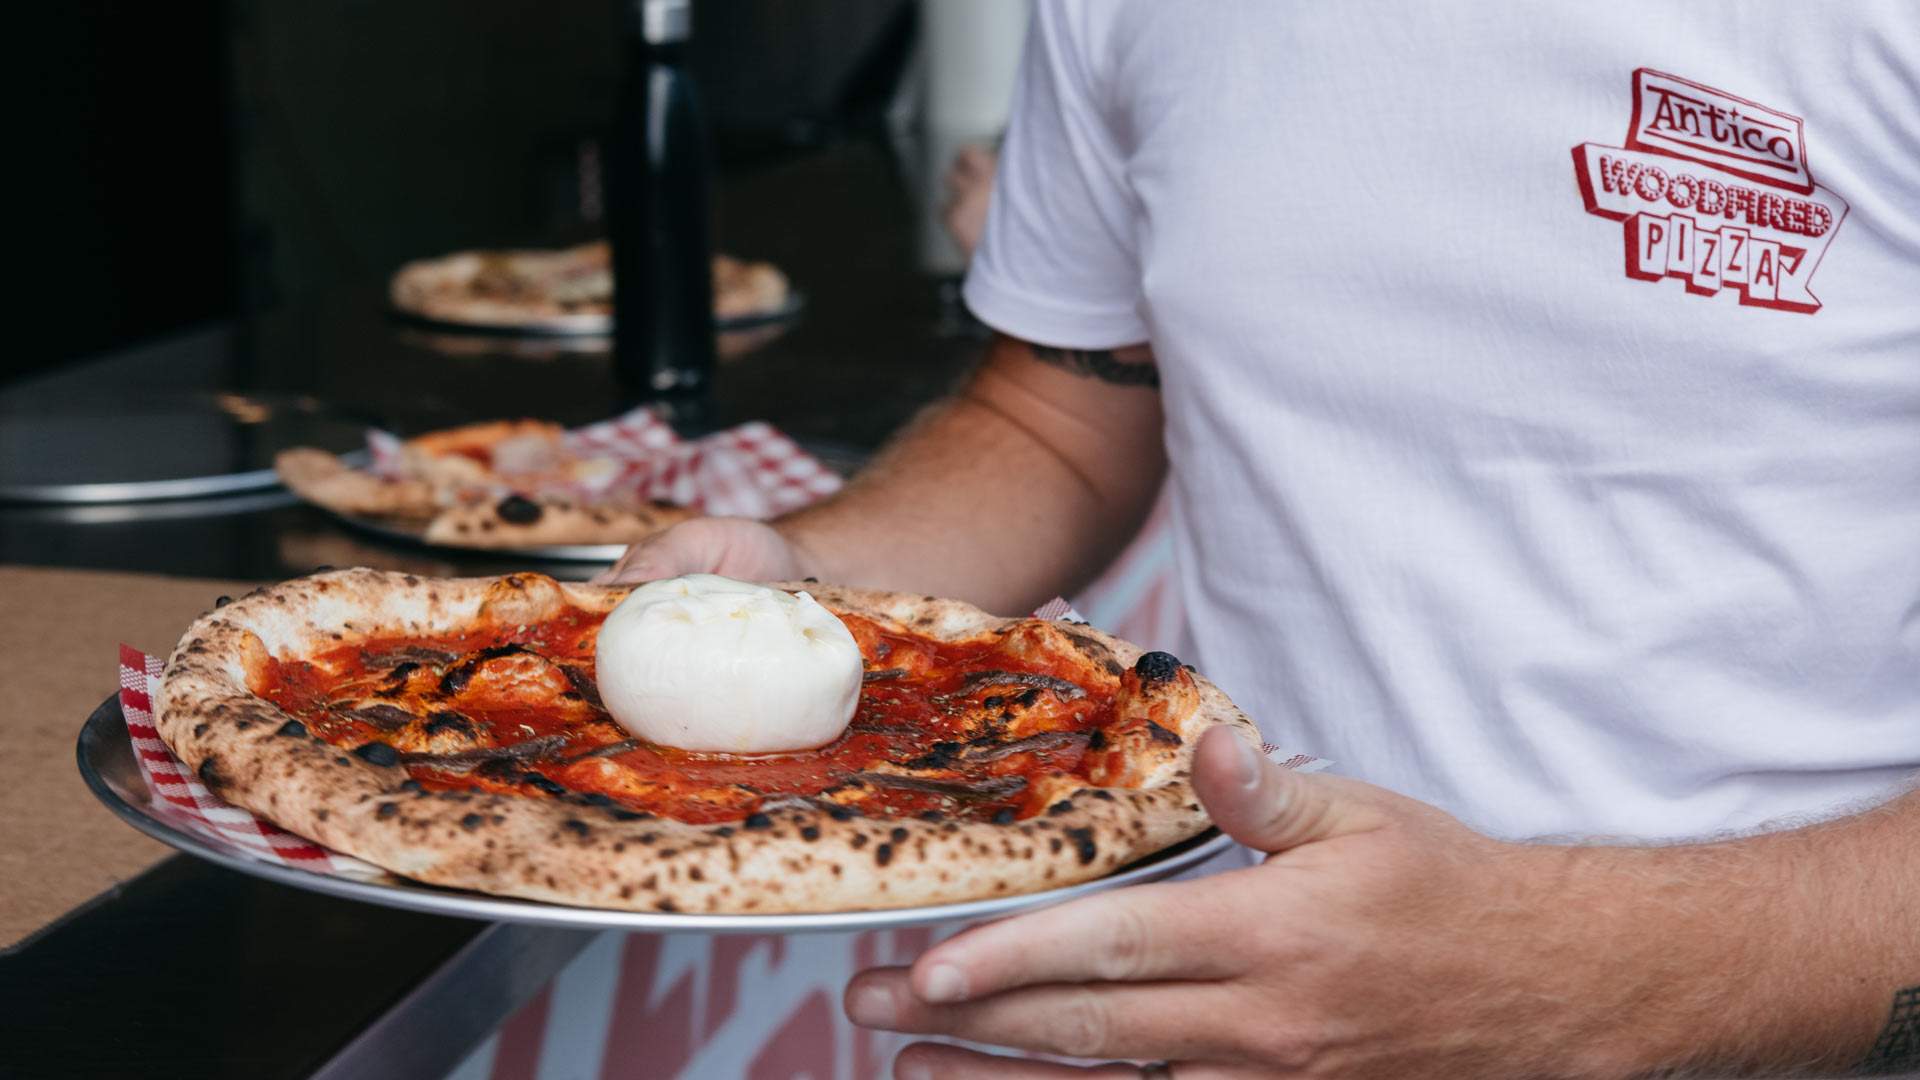 Antico's Is the New Family-Run Pizzeria Located Upstairs at the Beach Road Hotel